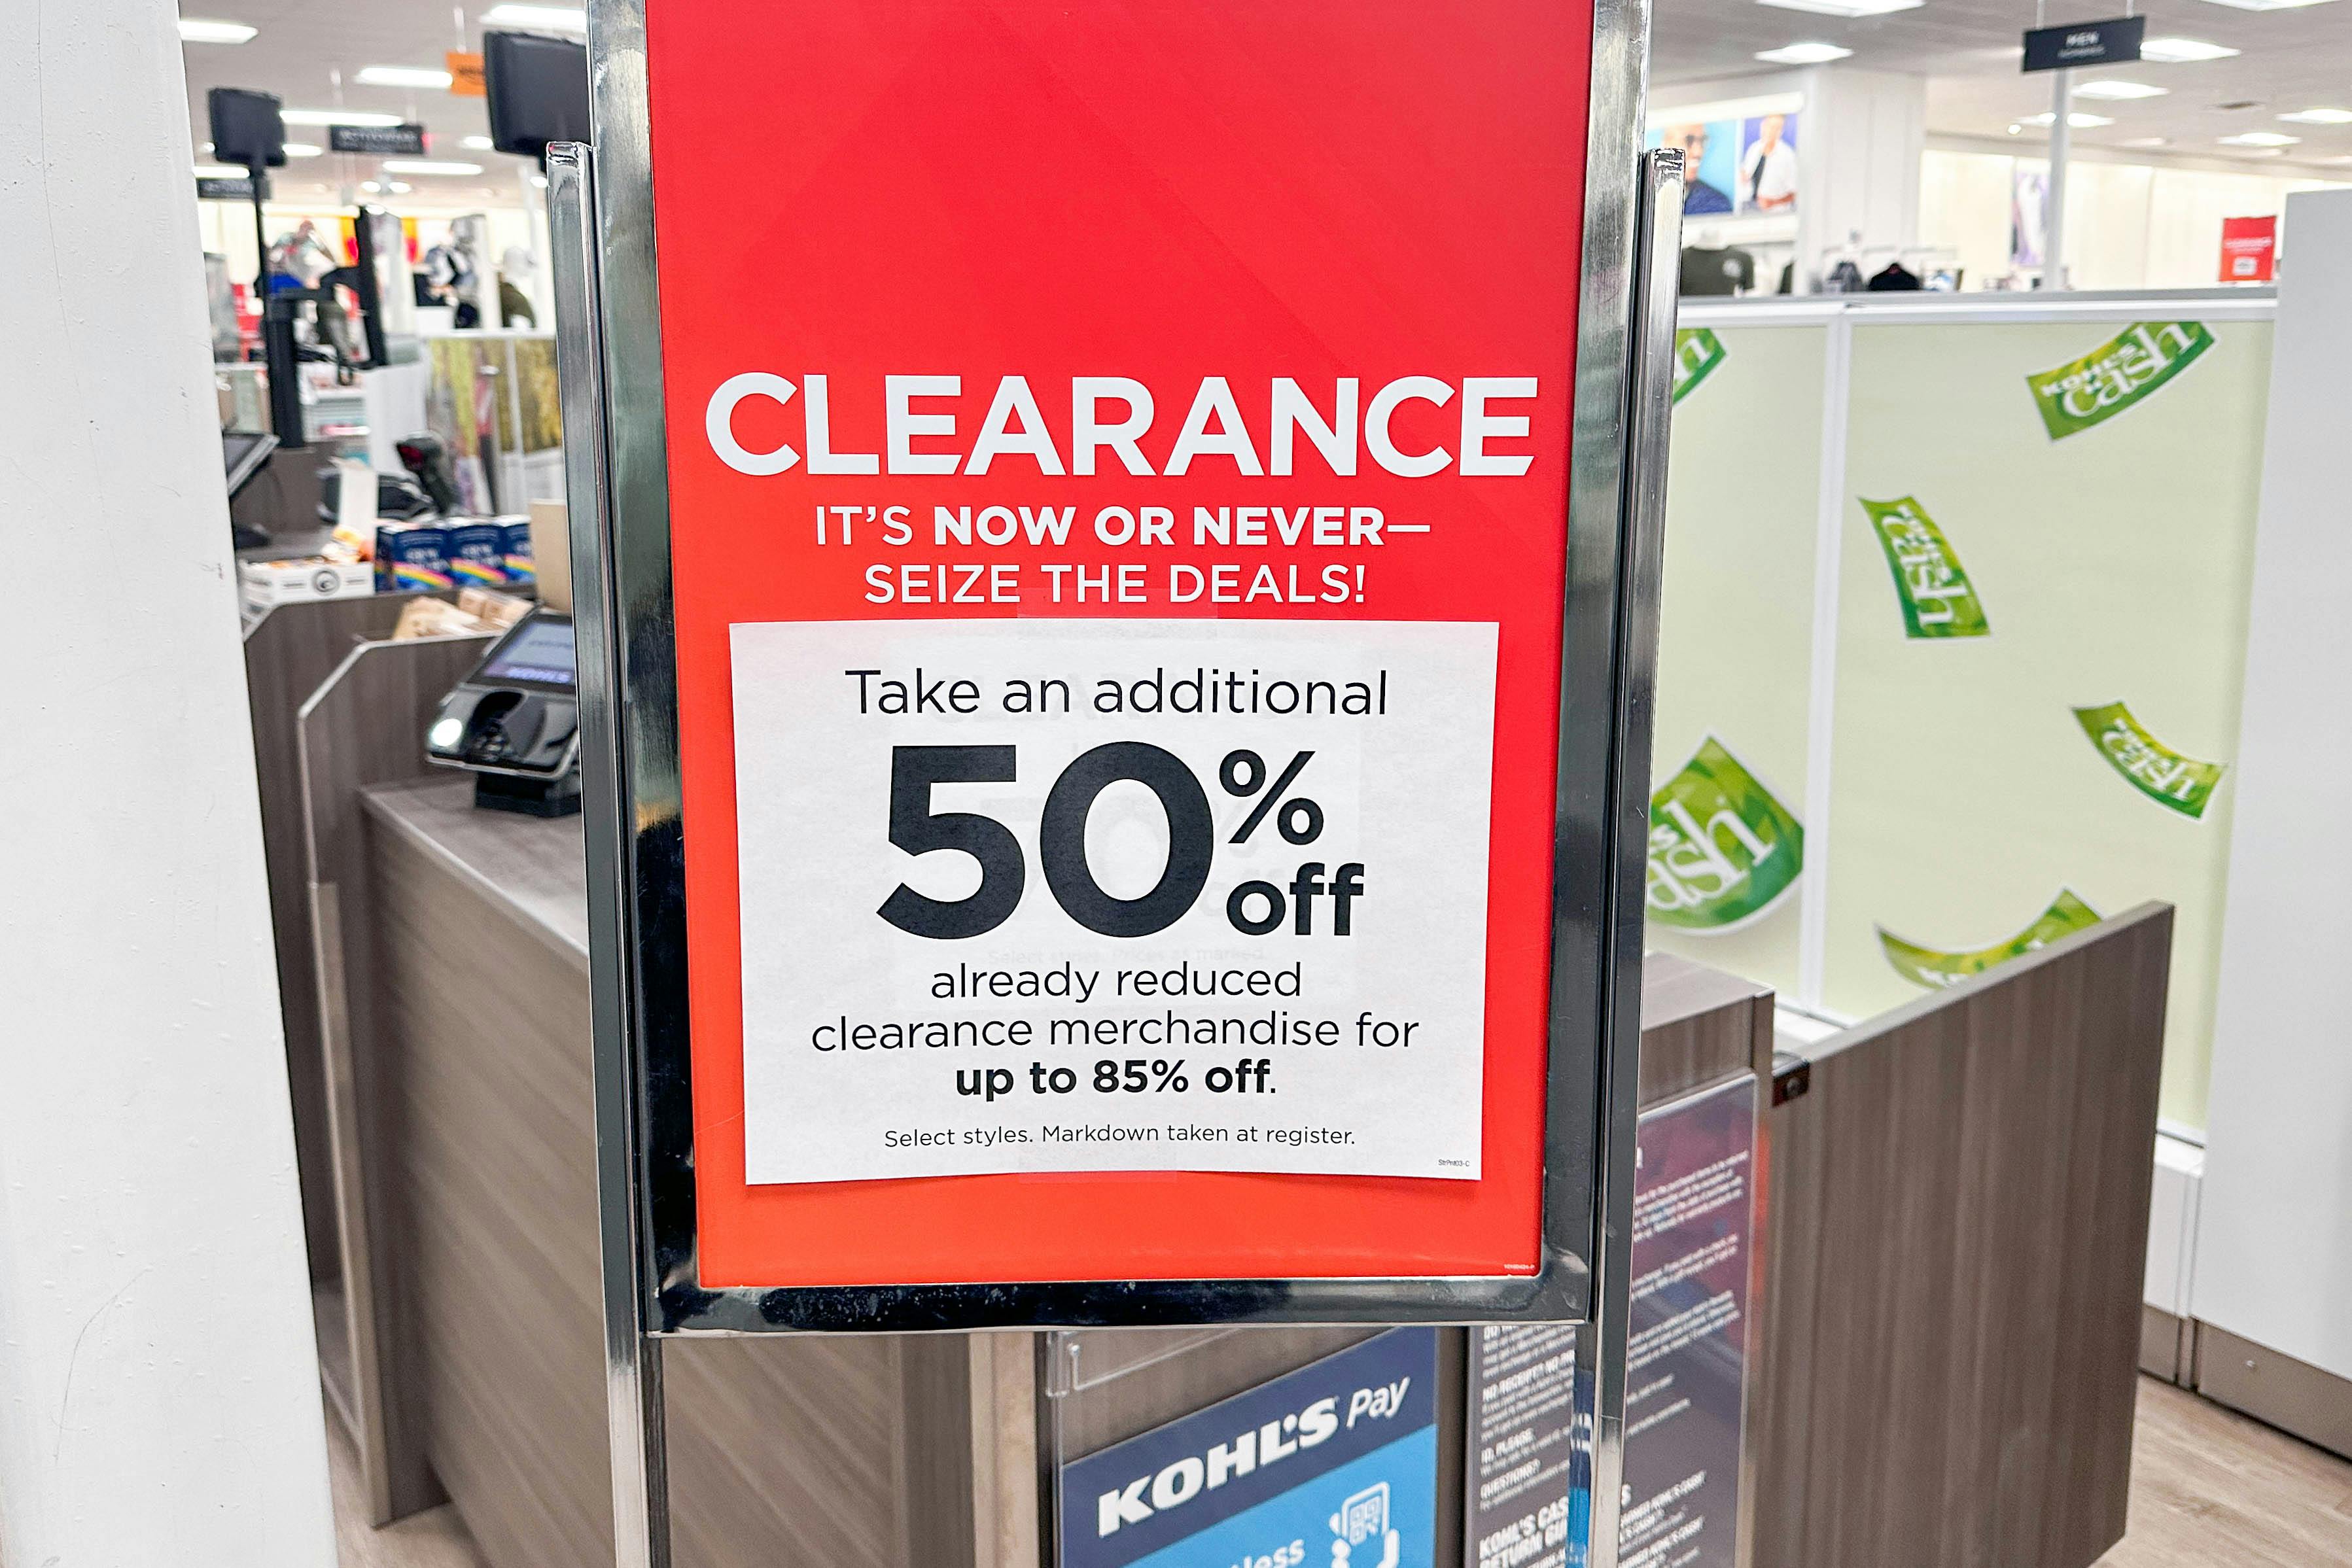 the Kohl's clearance event ends this weekend, Feb 5! #kohlsfinds